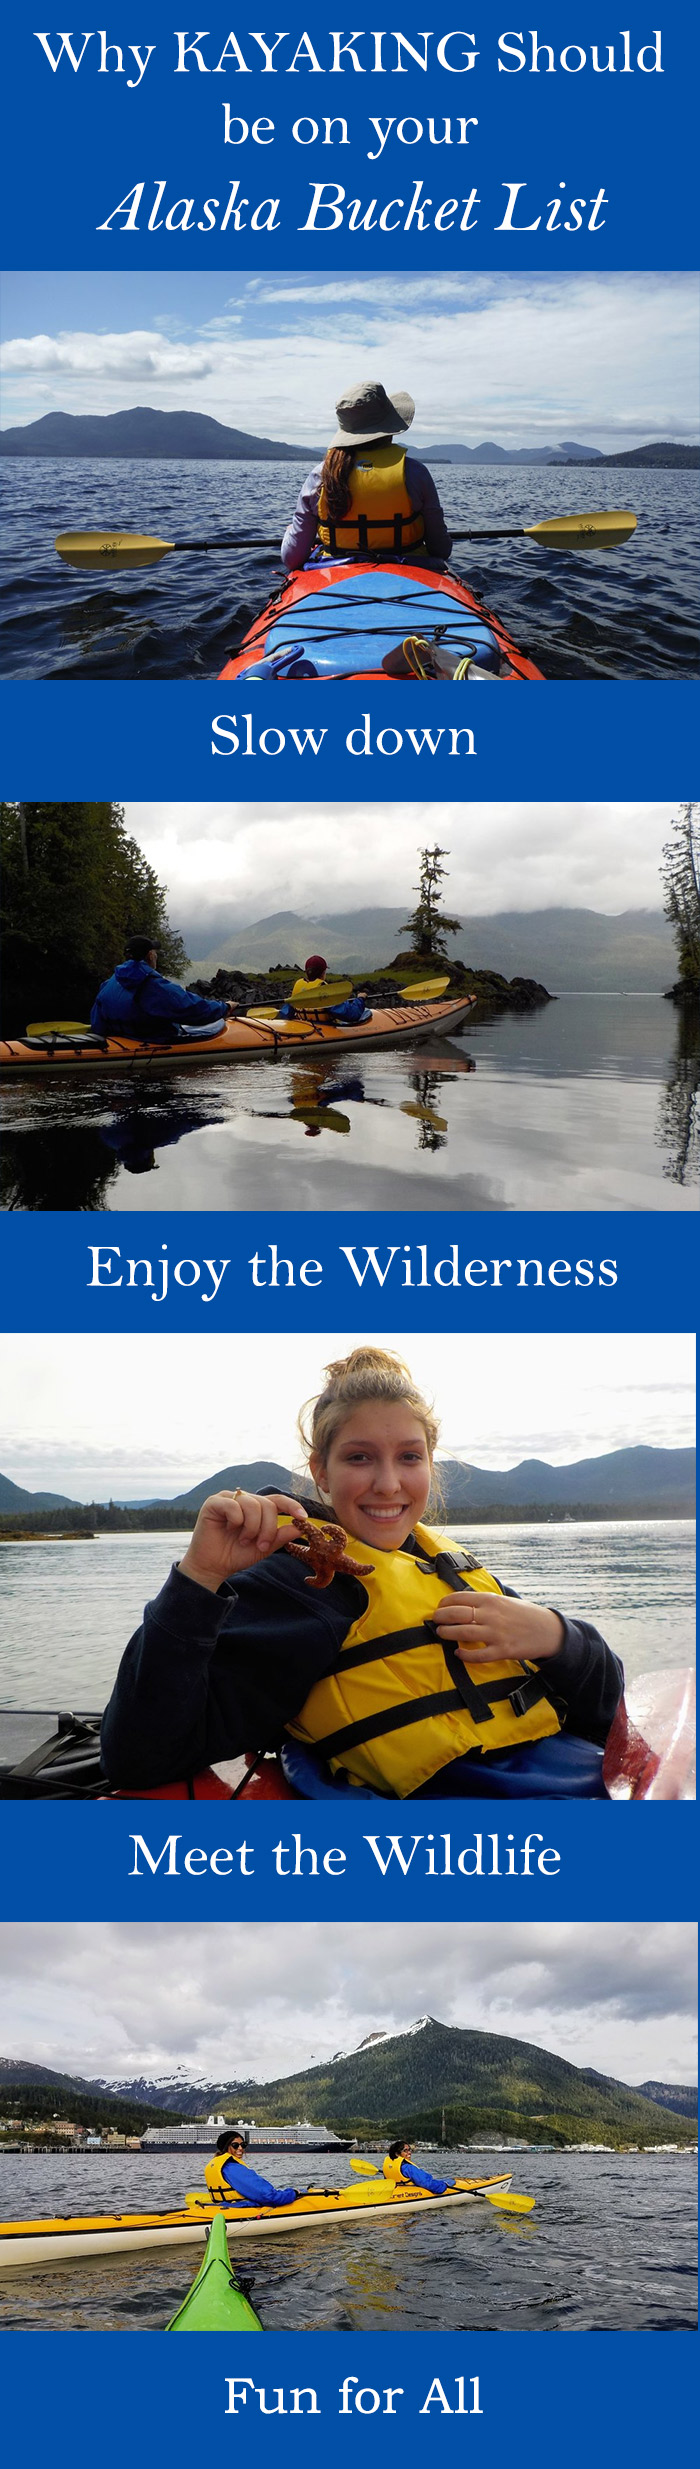  Come kayak with us in Ketchikan! It's a fabulous way to experience Alaska.  